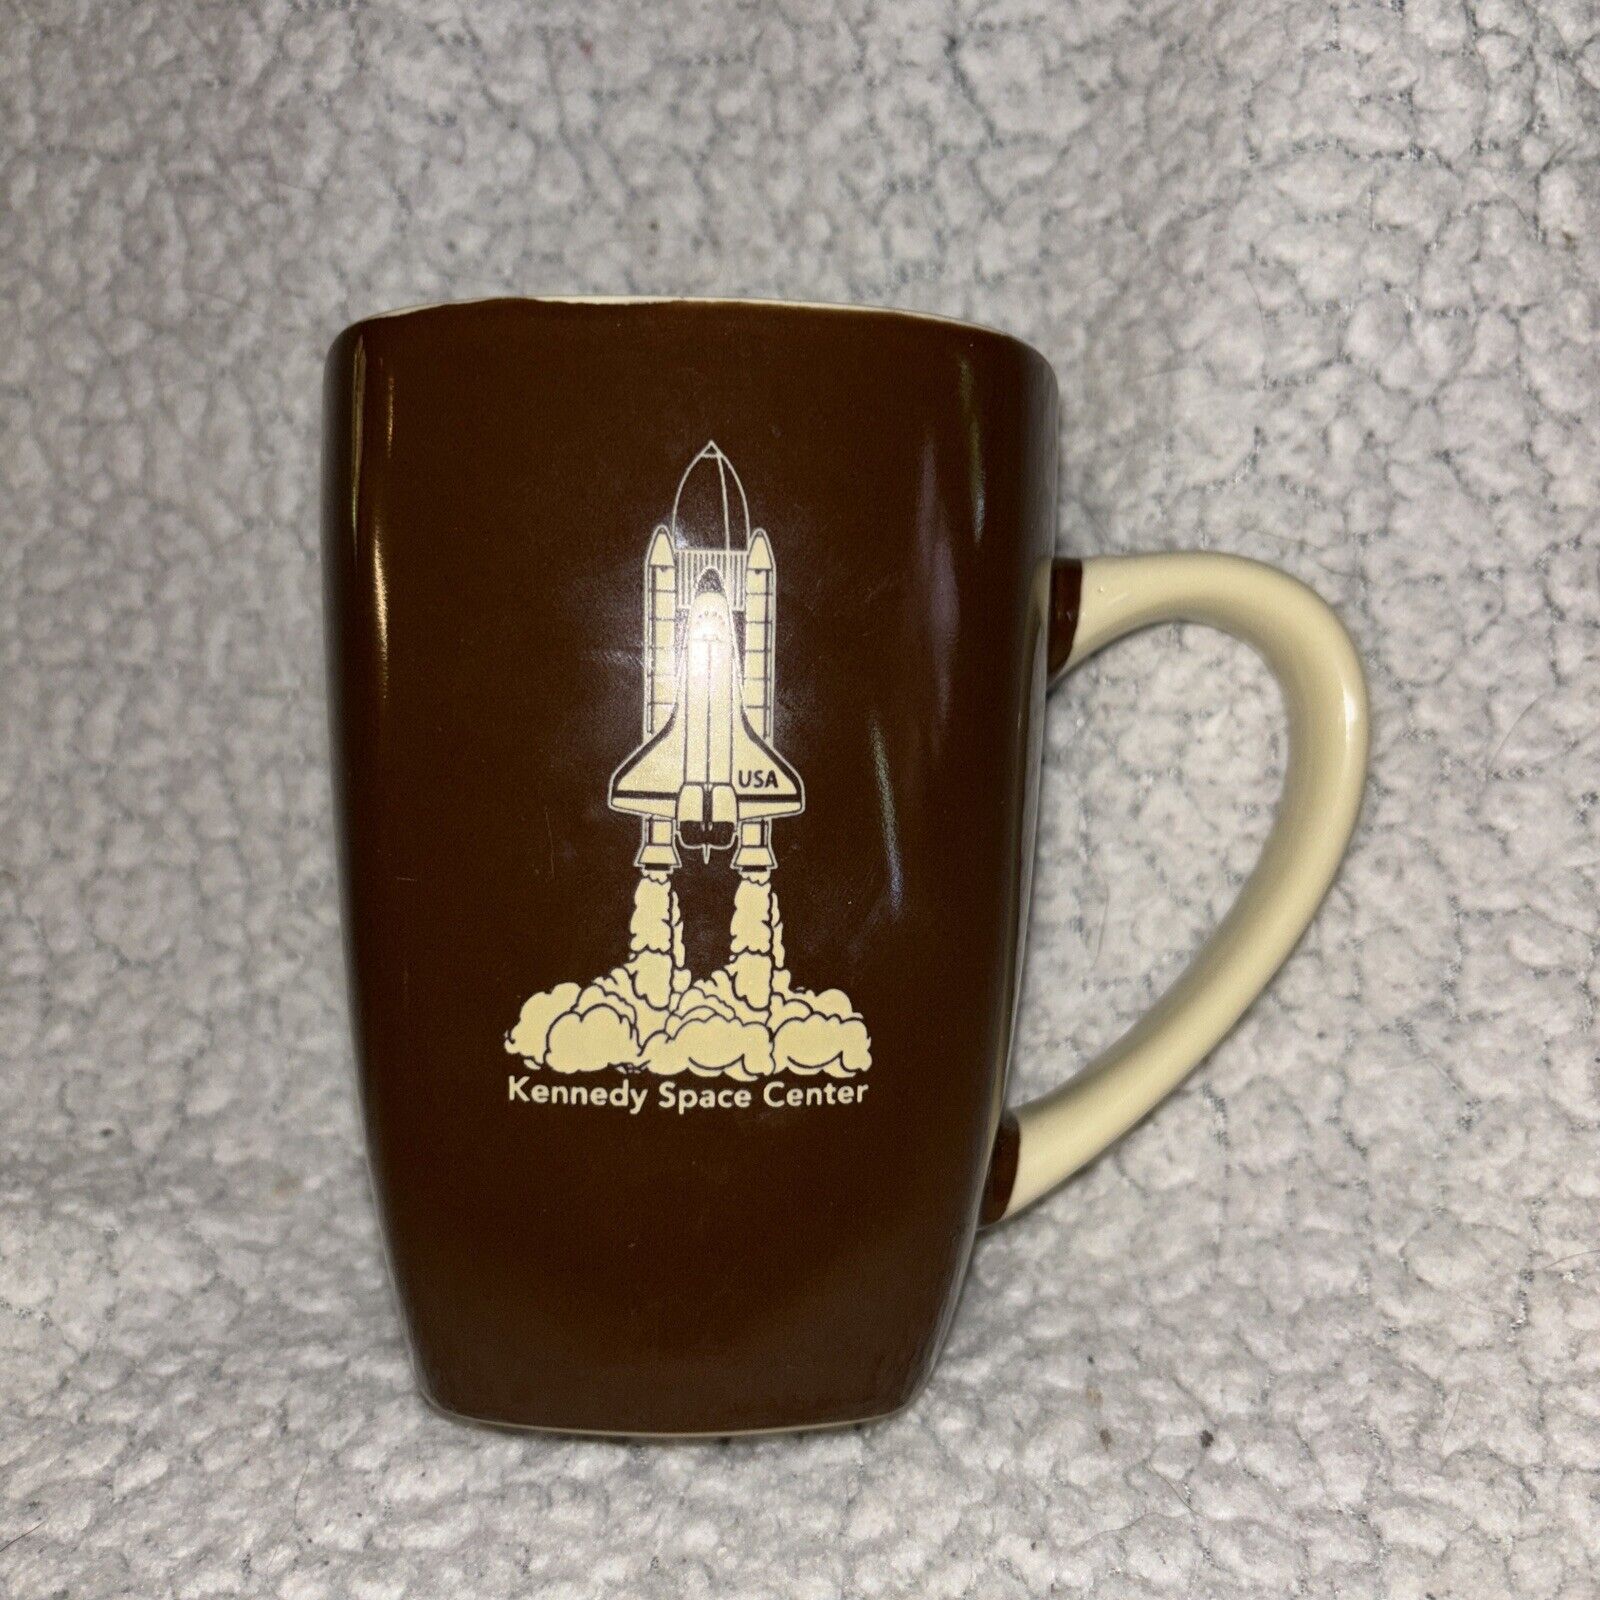 Vintage NASA SPACE SHUTTLE KENNEDY SPACE CENTER Coffee MUG Cup Brown